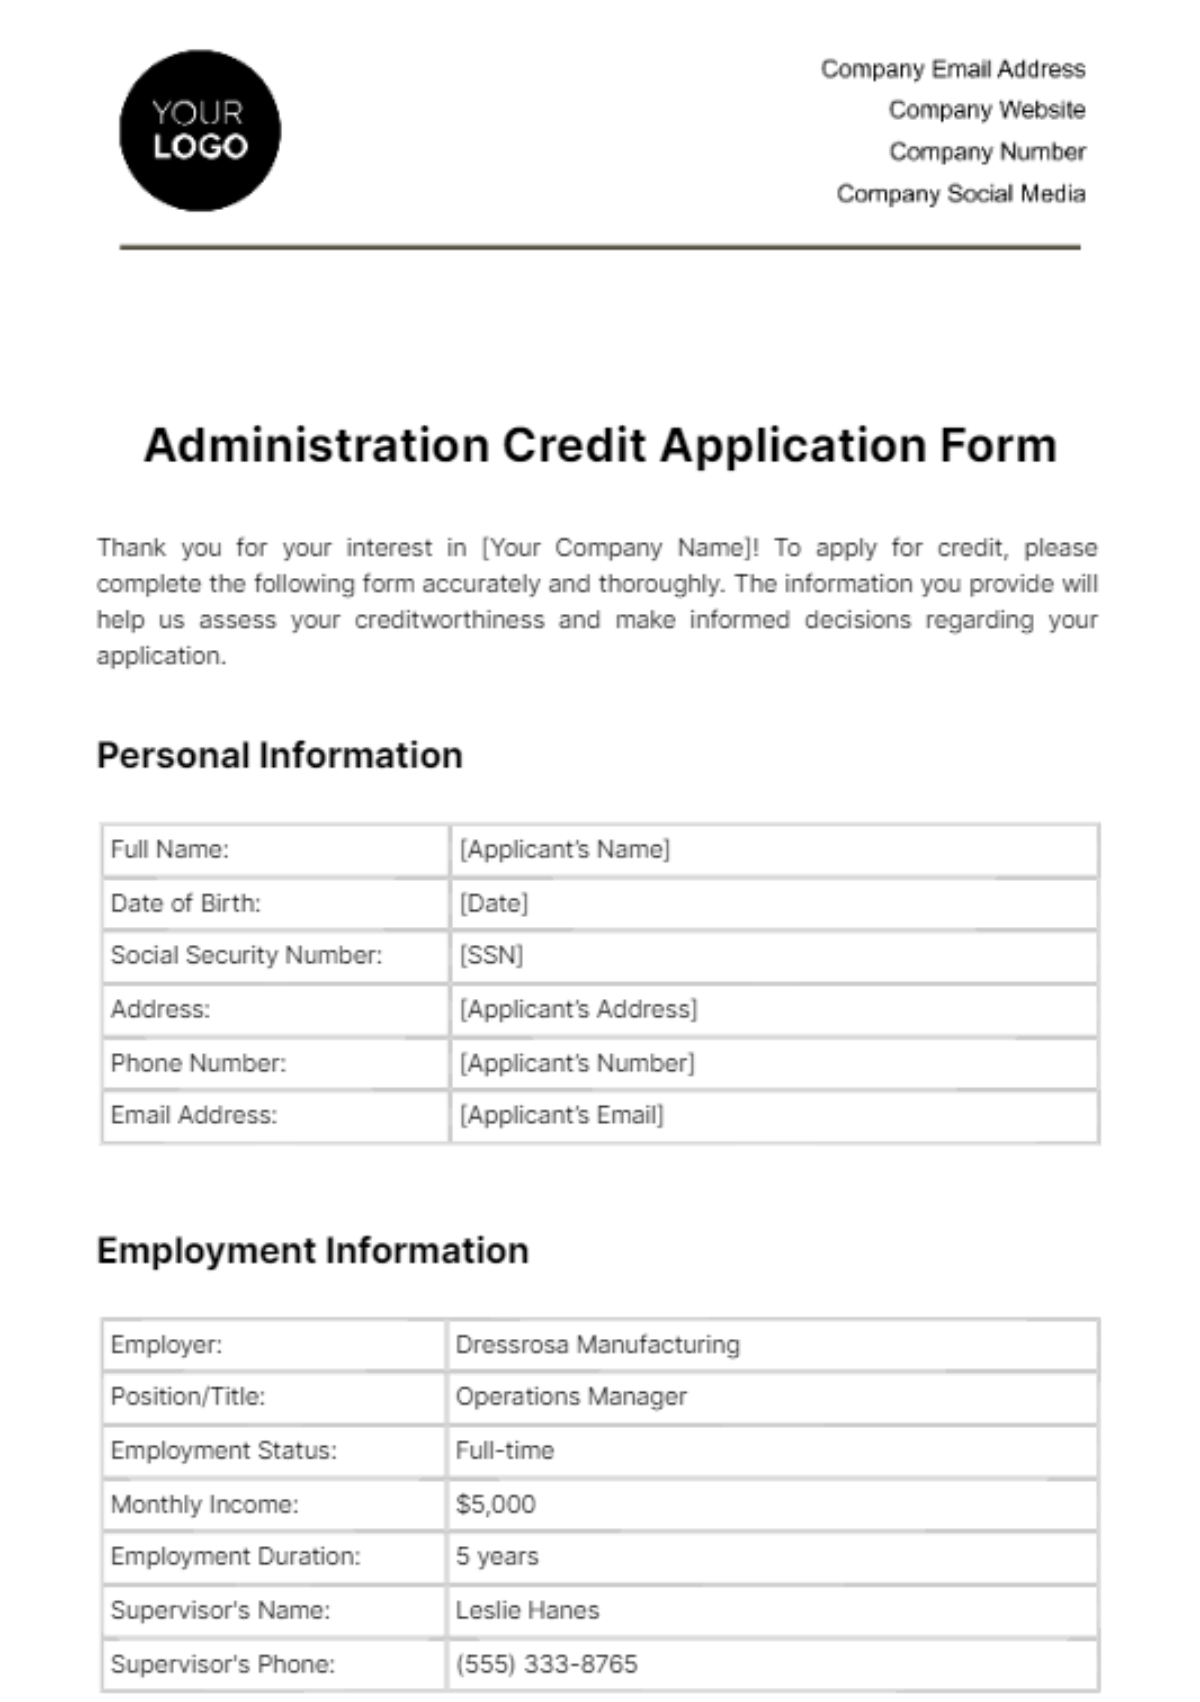 Free Administration Credit Application Form Template